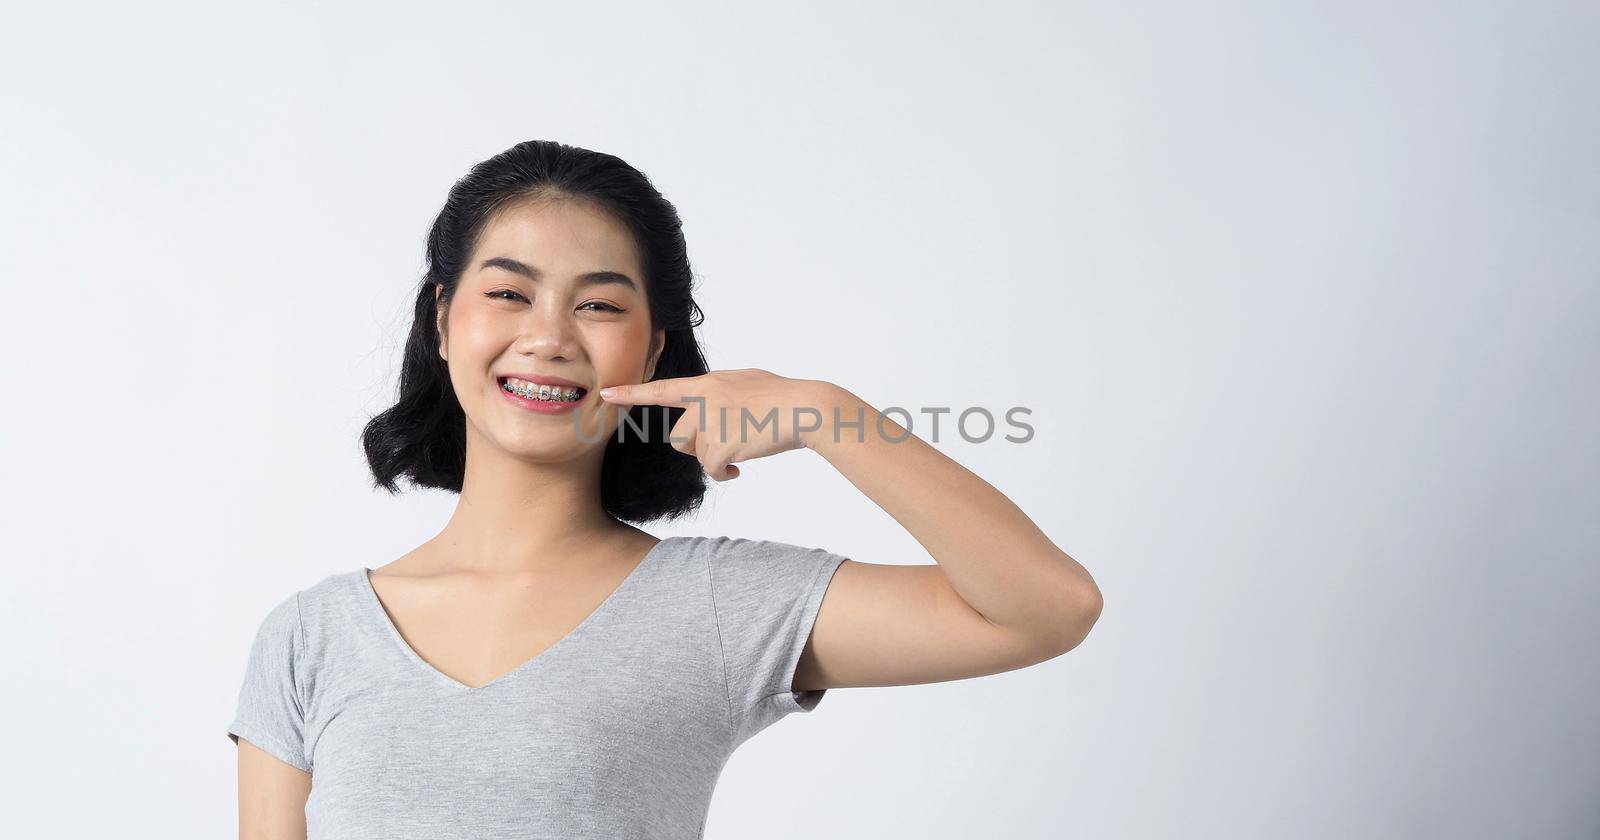 Dental braces of teen asian woman wearing braces teeth and contact lenses, she very confident and proudly present herself and smile on white background studio shot, Happiness teenager smiling facial expression.